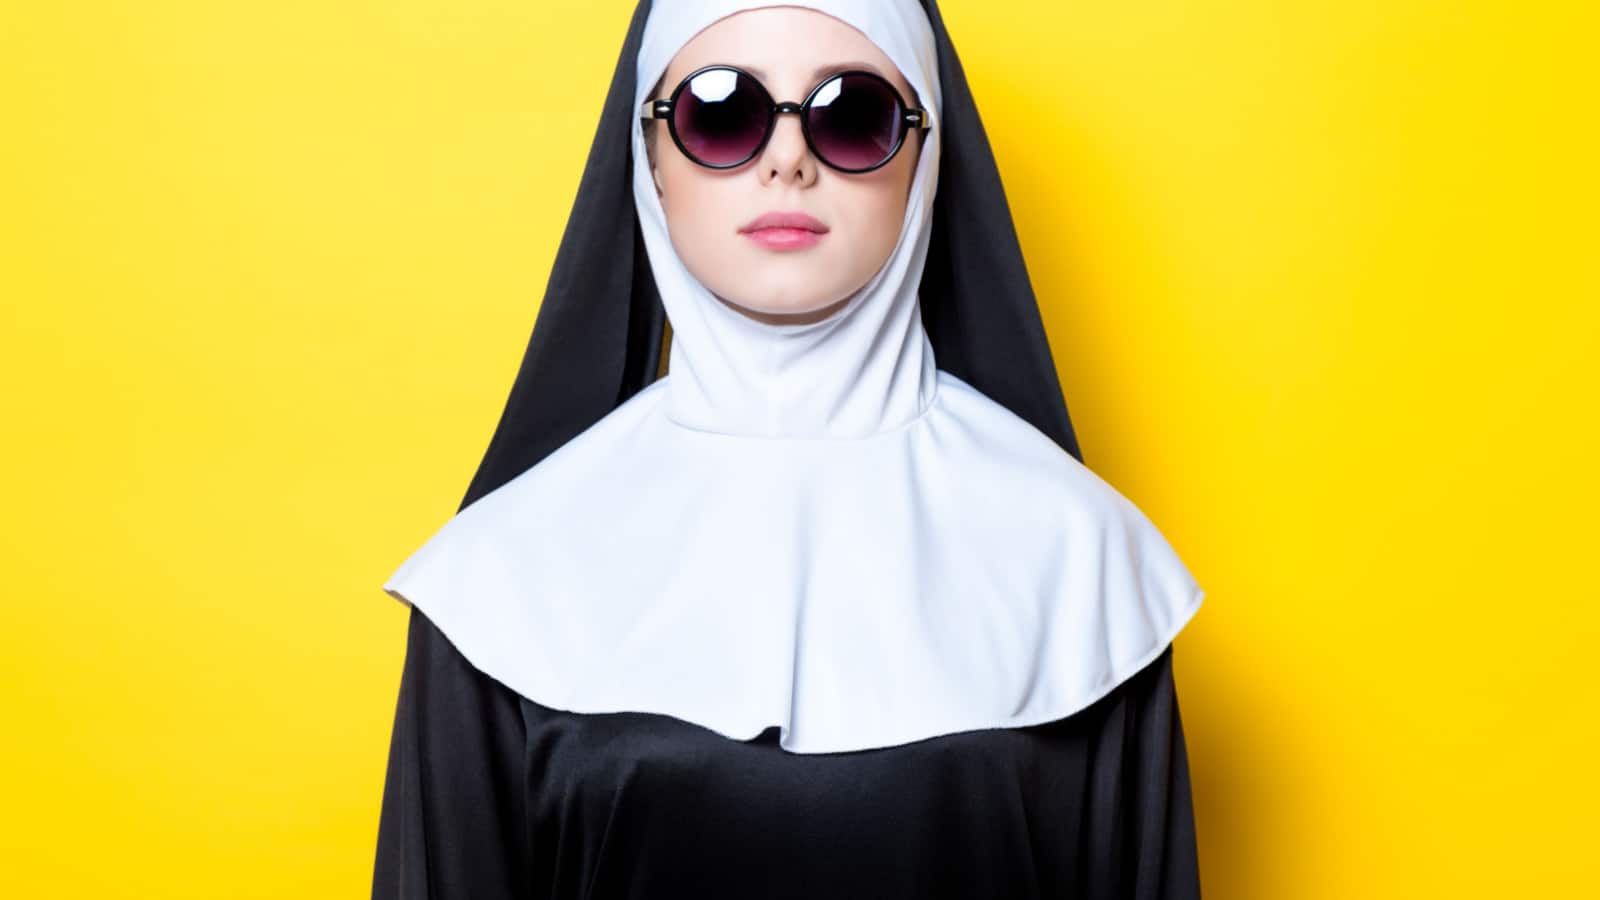 Young nun with sunglasses on yellow background